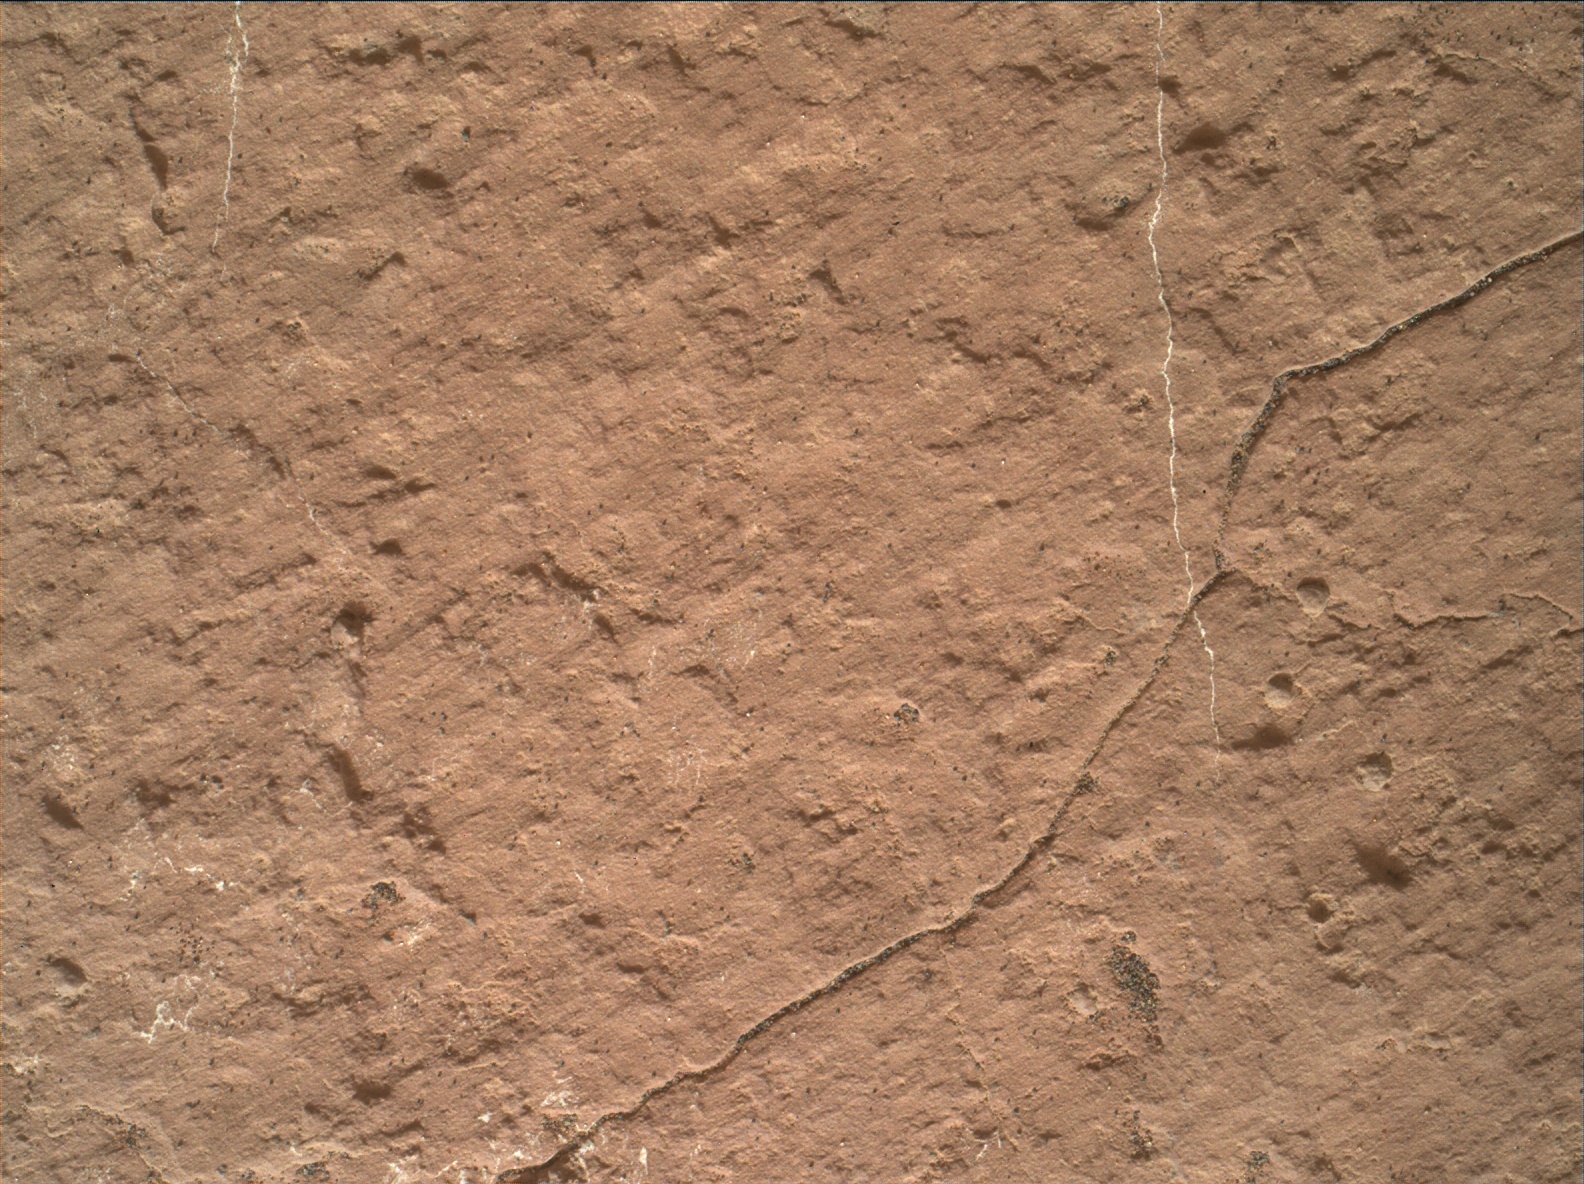 Nasa's Mars rover Curiosity acquired this image using its Mars Hand Lens Imager (MAHLI) on Sol 1511